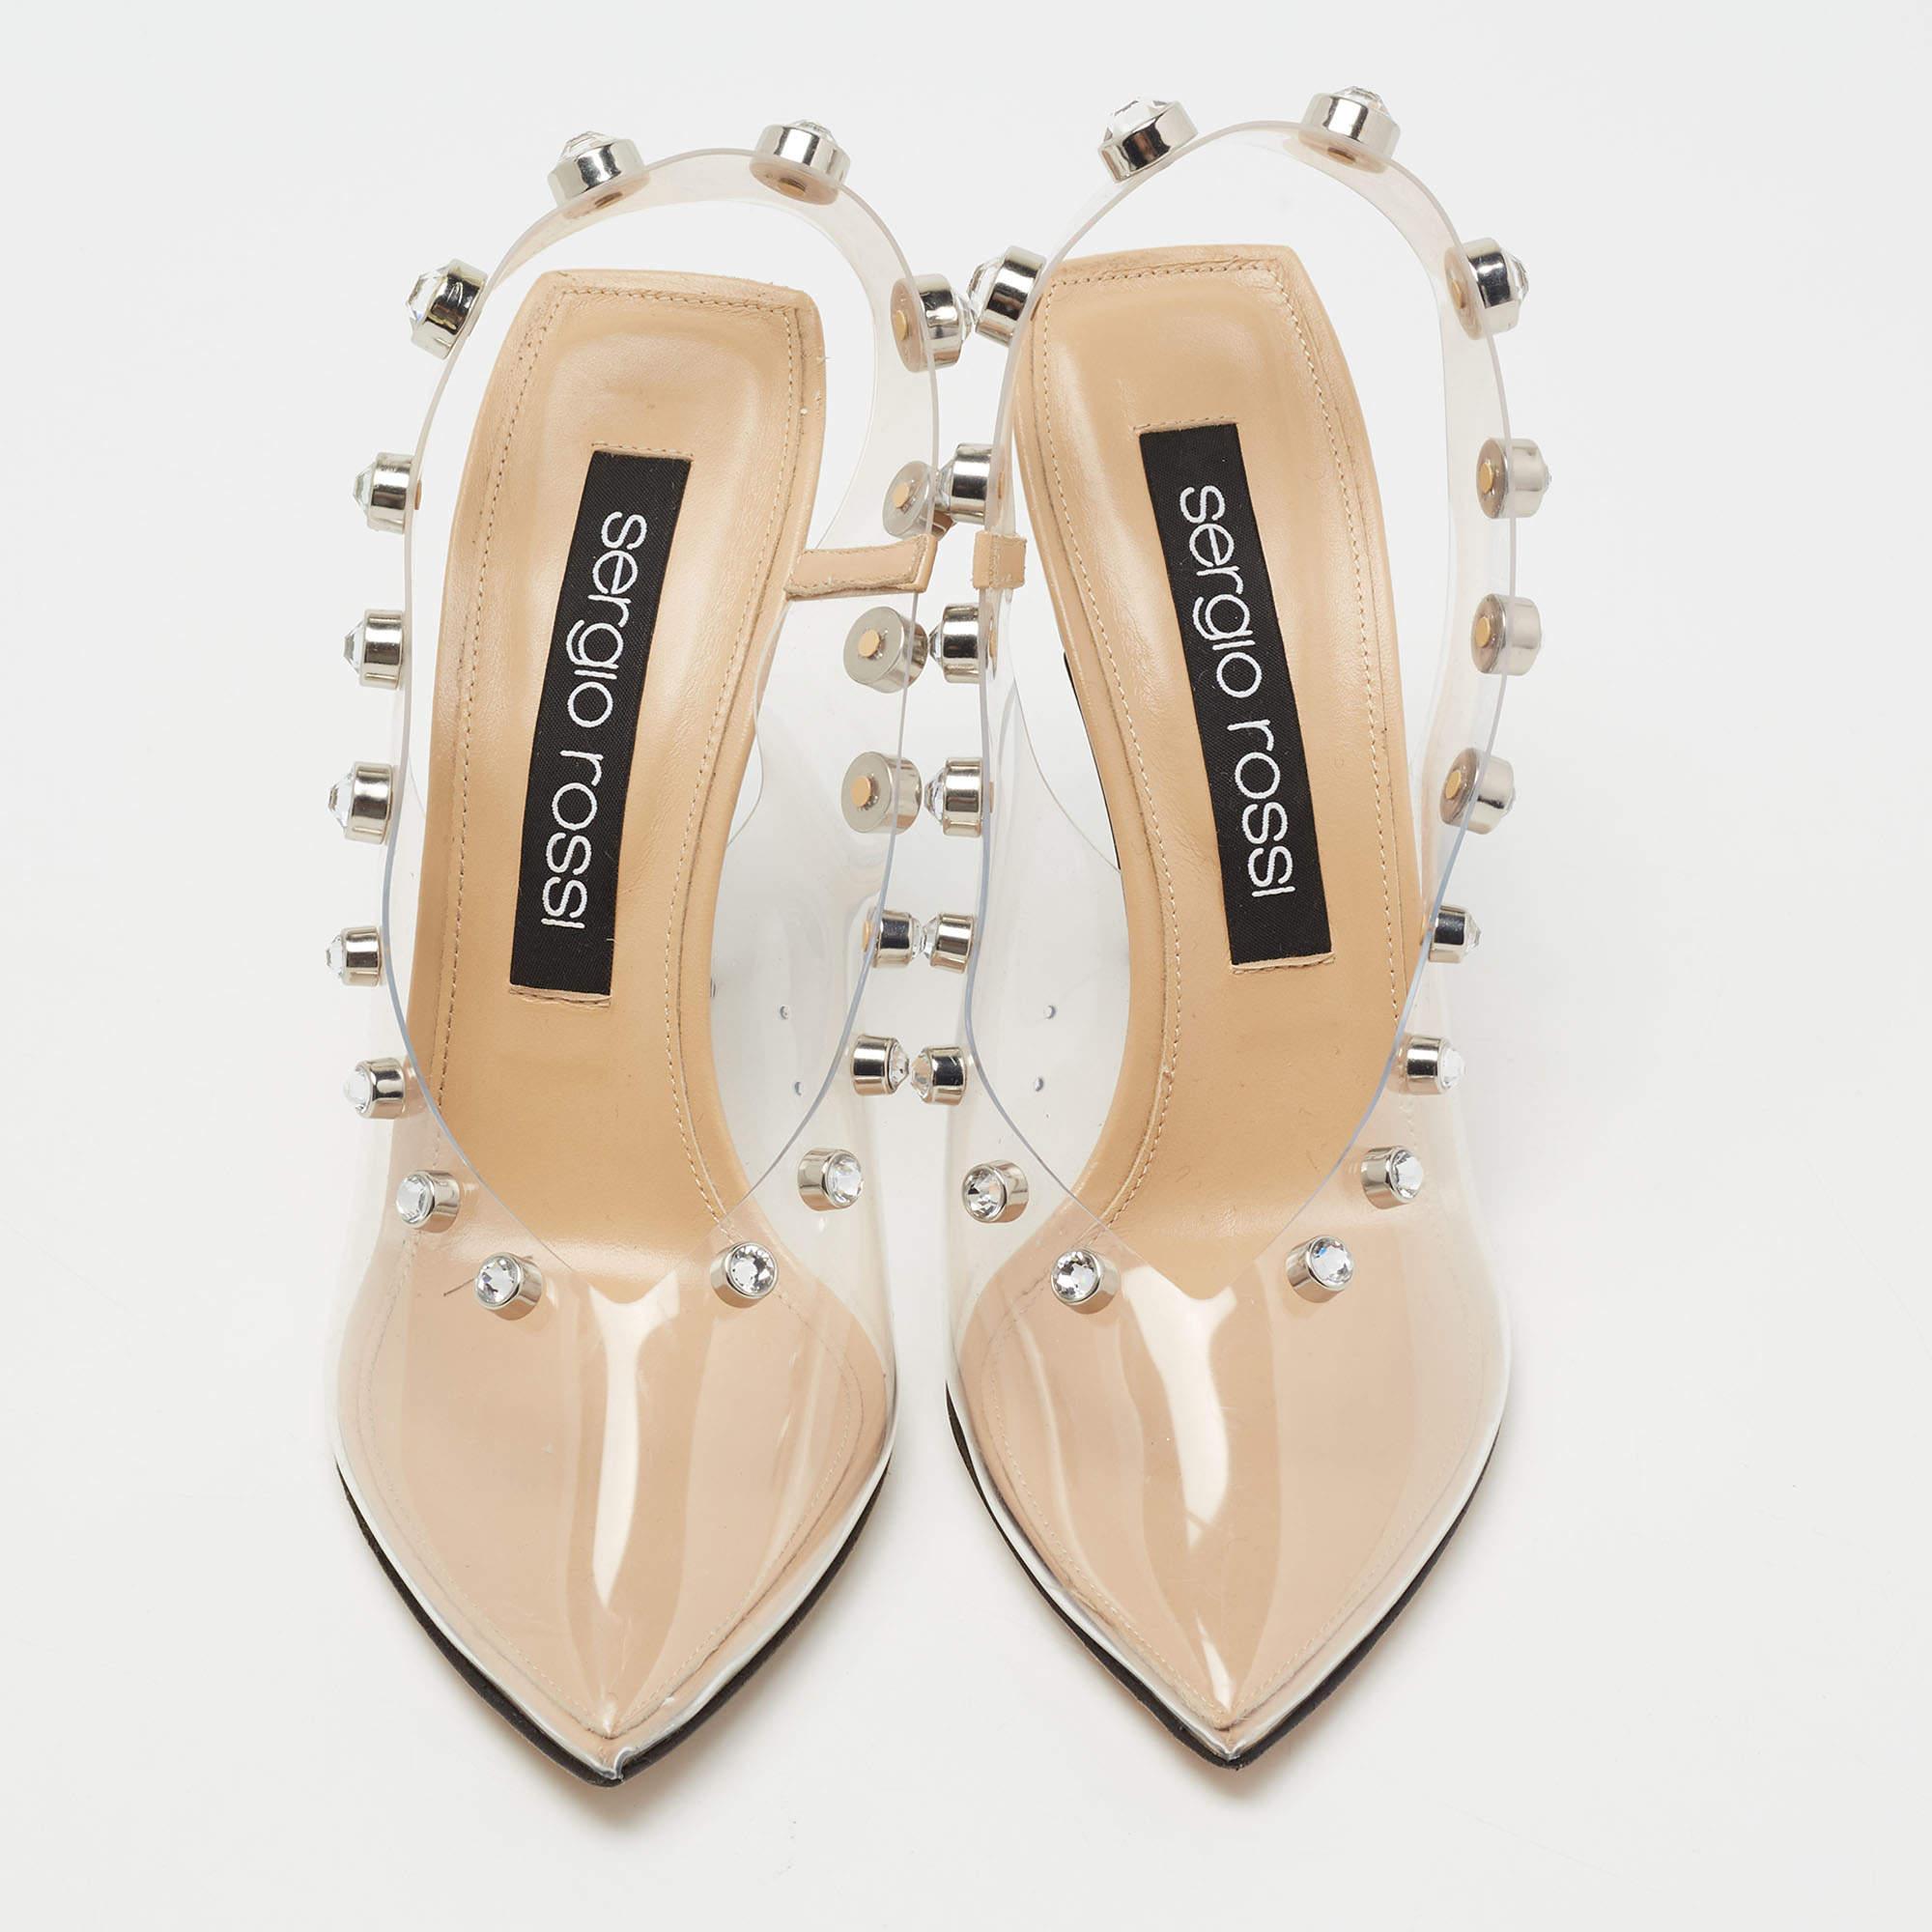 This timeless pair of pumps from Sergio Rossi looks even better on the feet. The shoes have an elegant design made from clear PVC, complemented by 11 cm heels, crystal studs, and slingbacks for a sleek finish.

